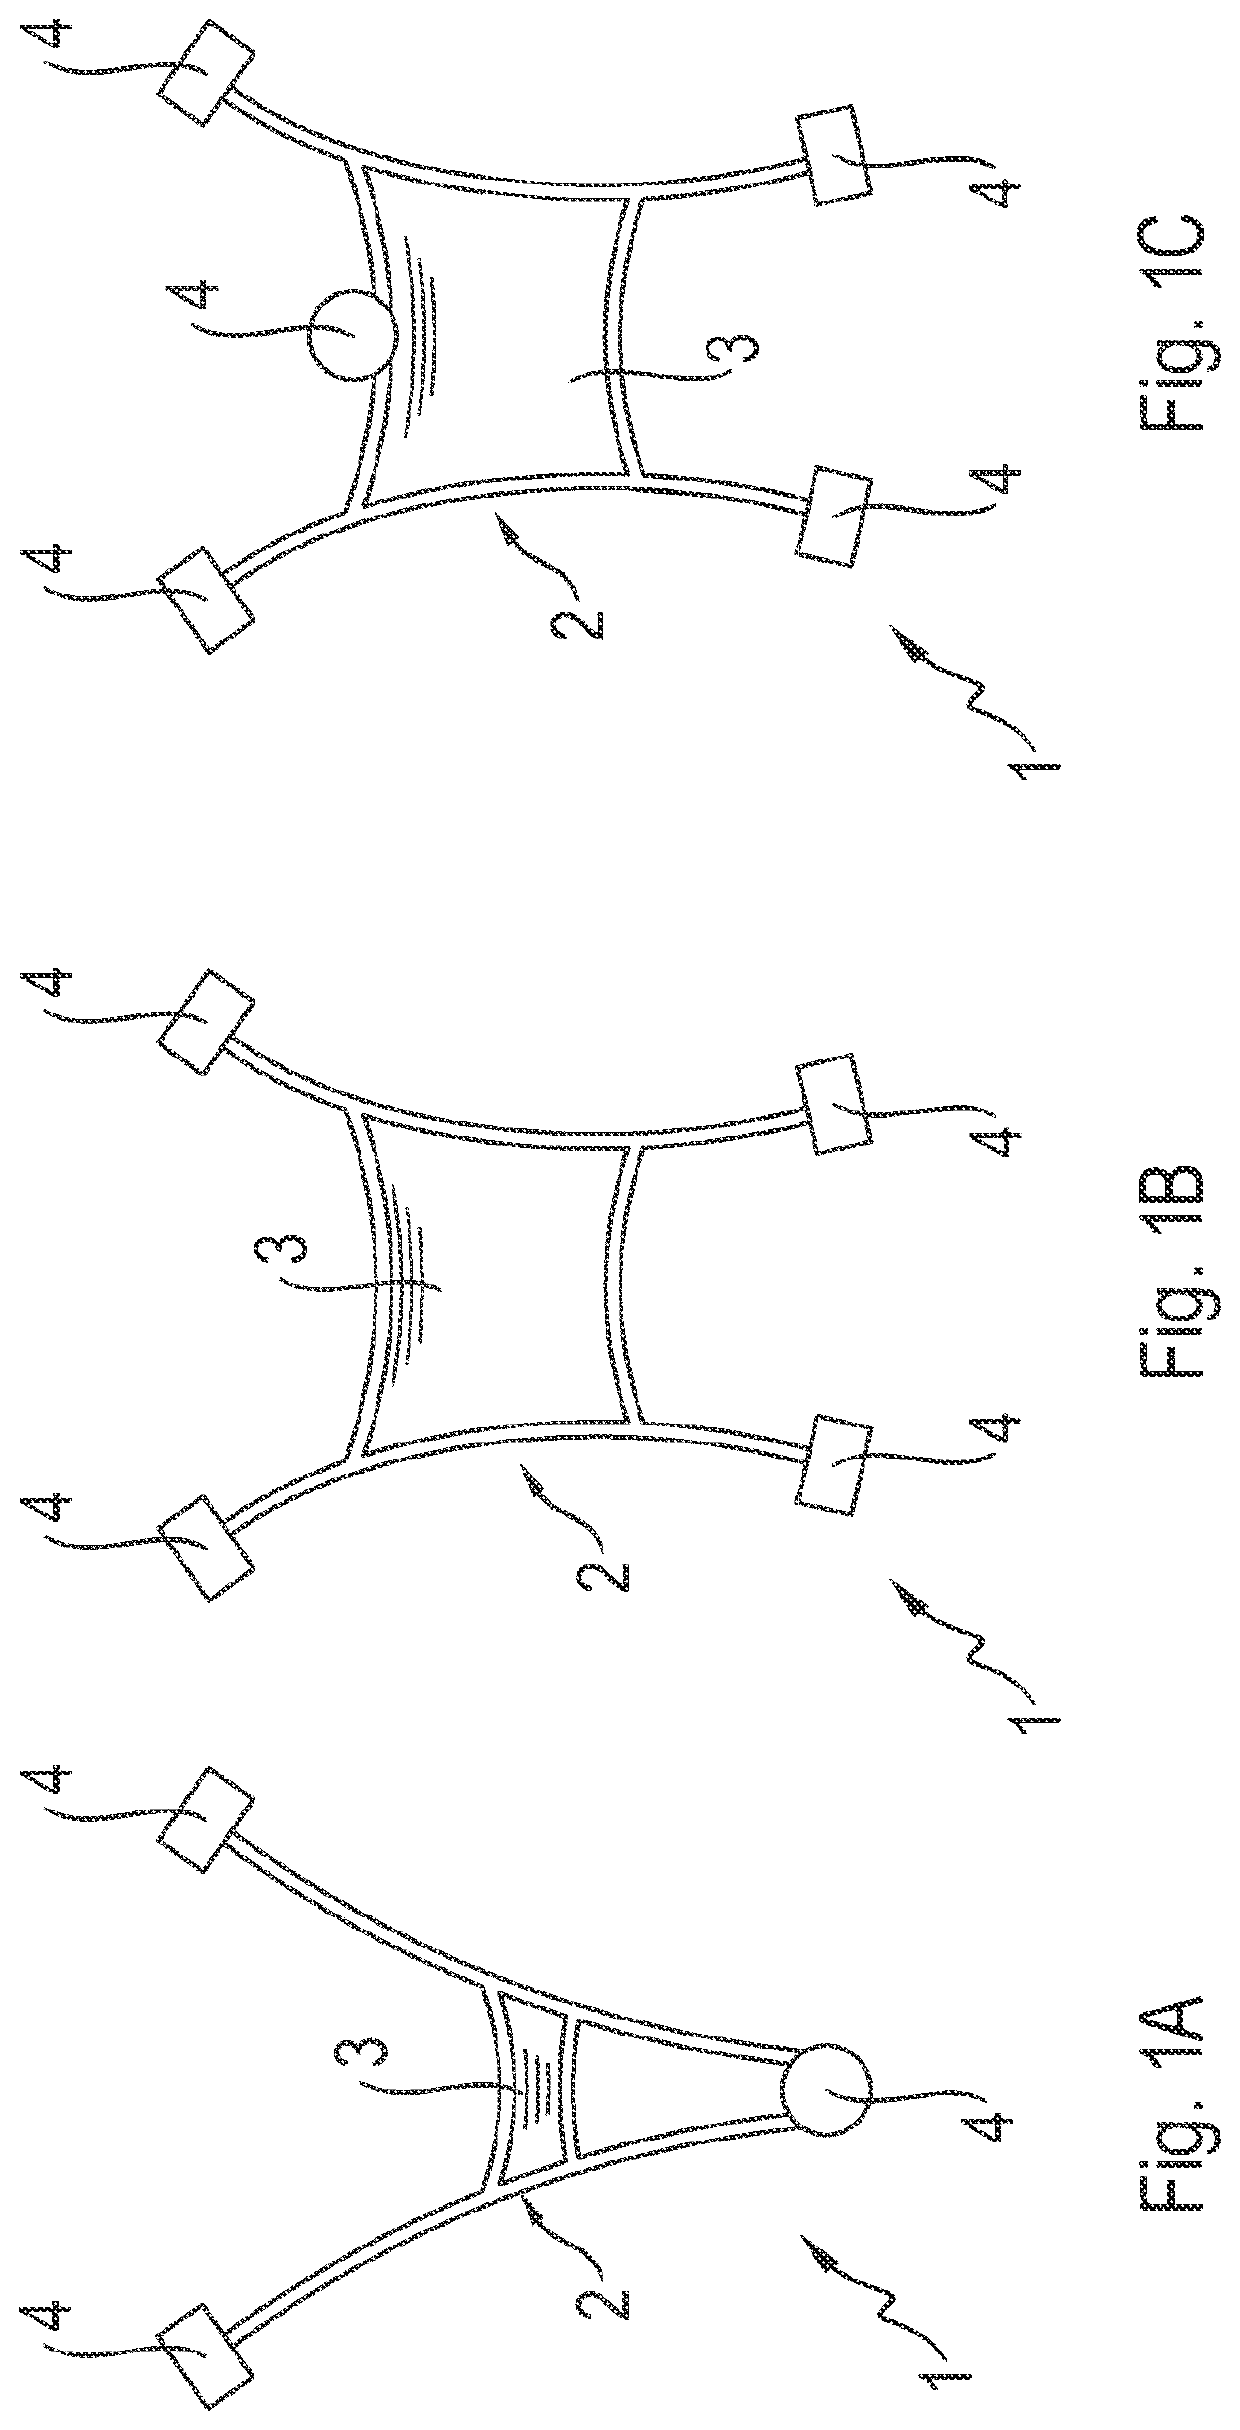 Multi-Point Link for an Undercarriage of a Vehicle